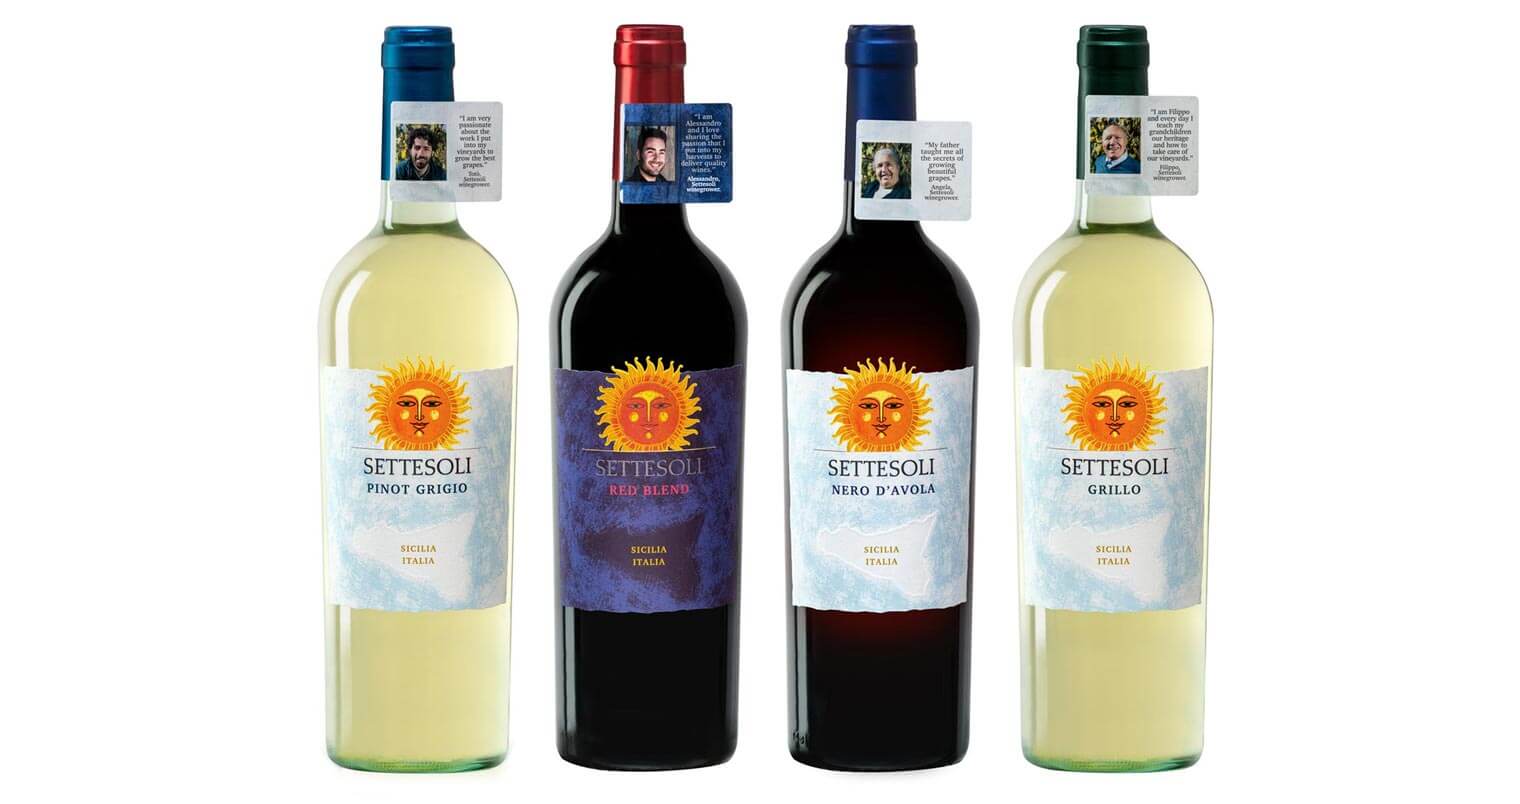 New Range from Cantine Settesoli, bottles on white, featured image